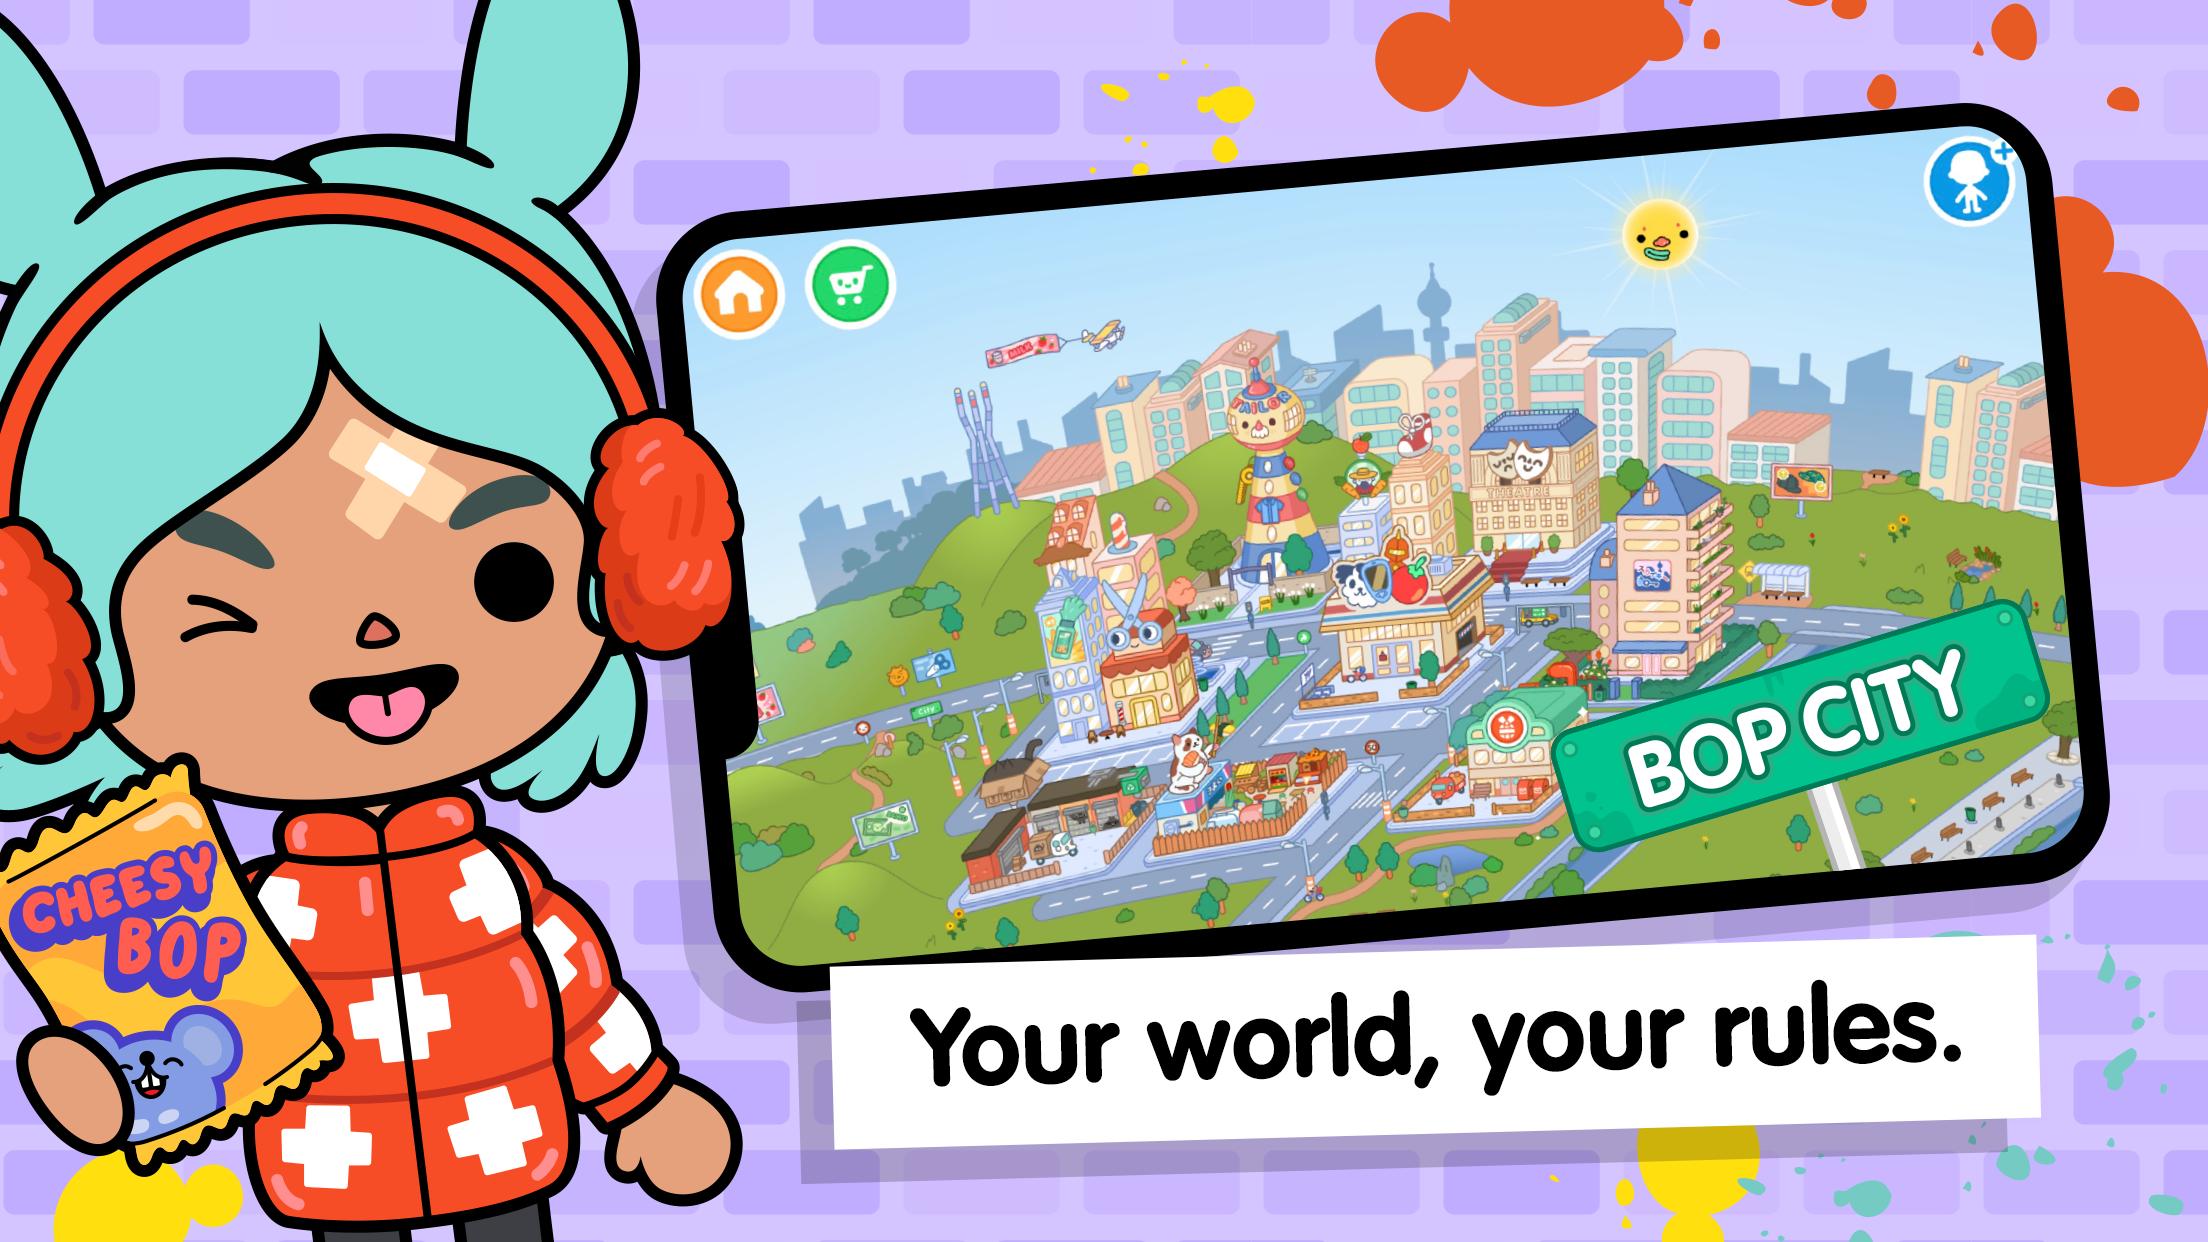 Download Toca boca Life World Baby Guia android on PC